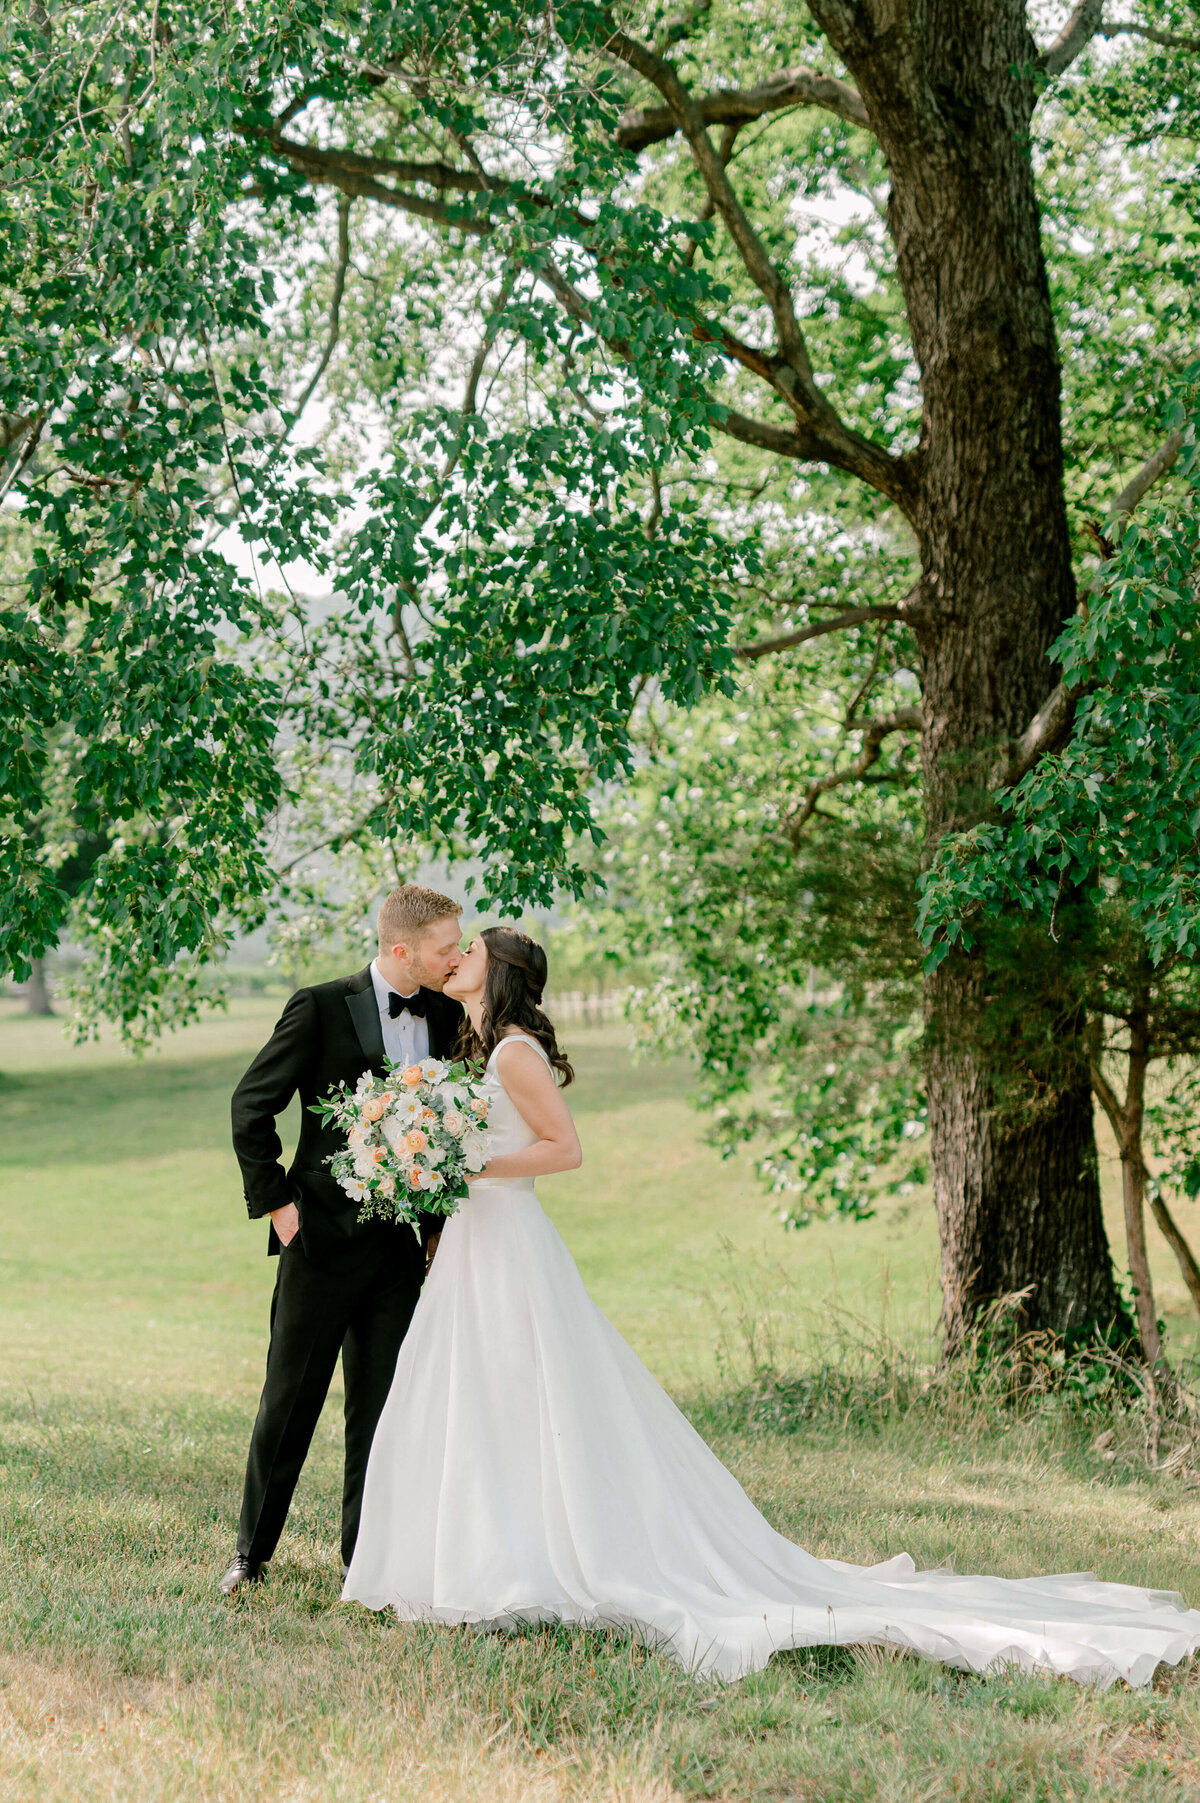 Romantic image of a couple kissing under a tree at a winery located outside of Washington DC